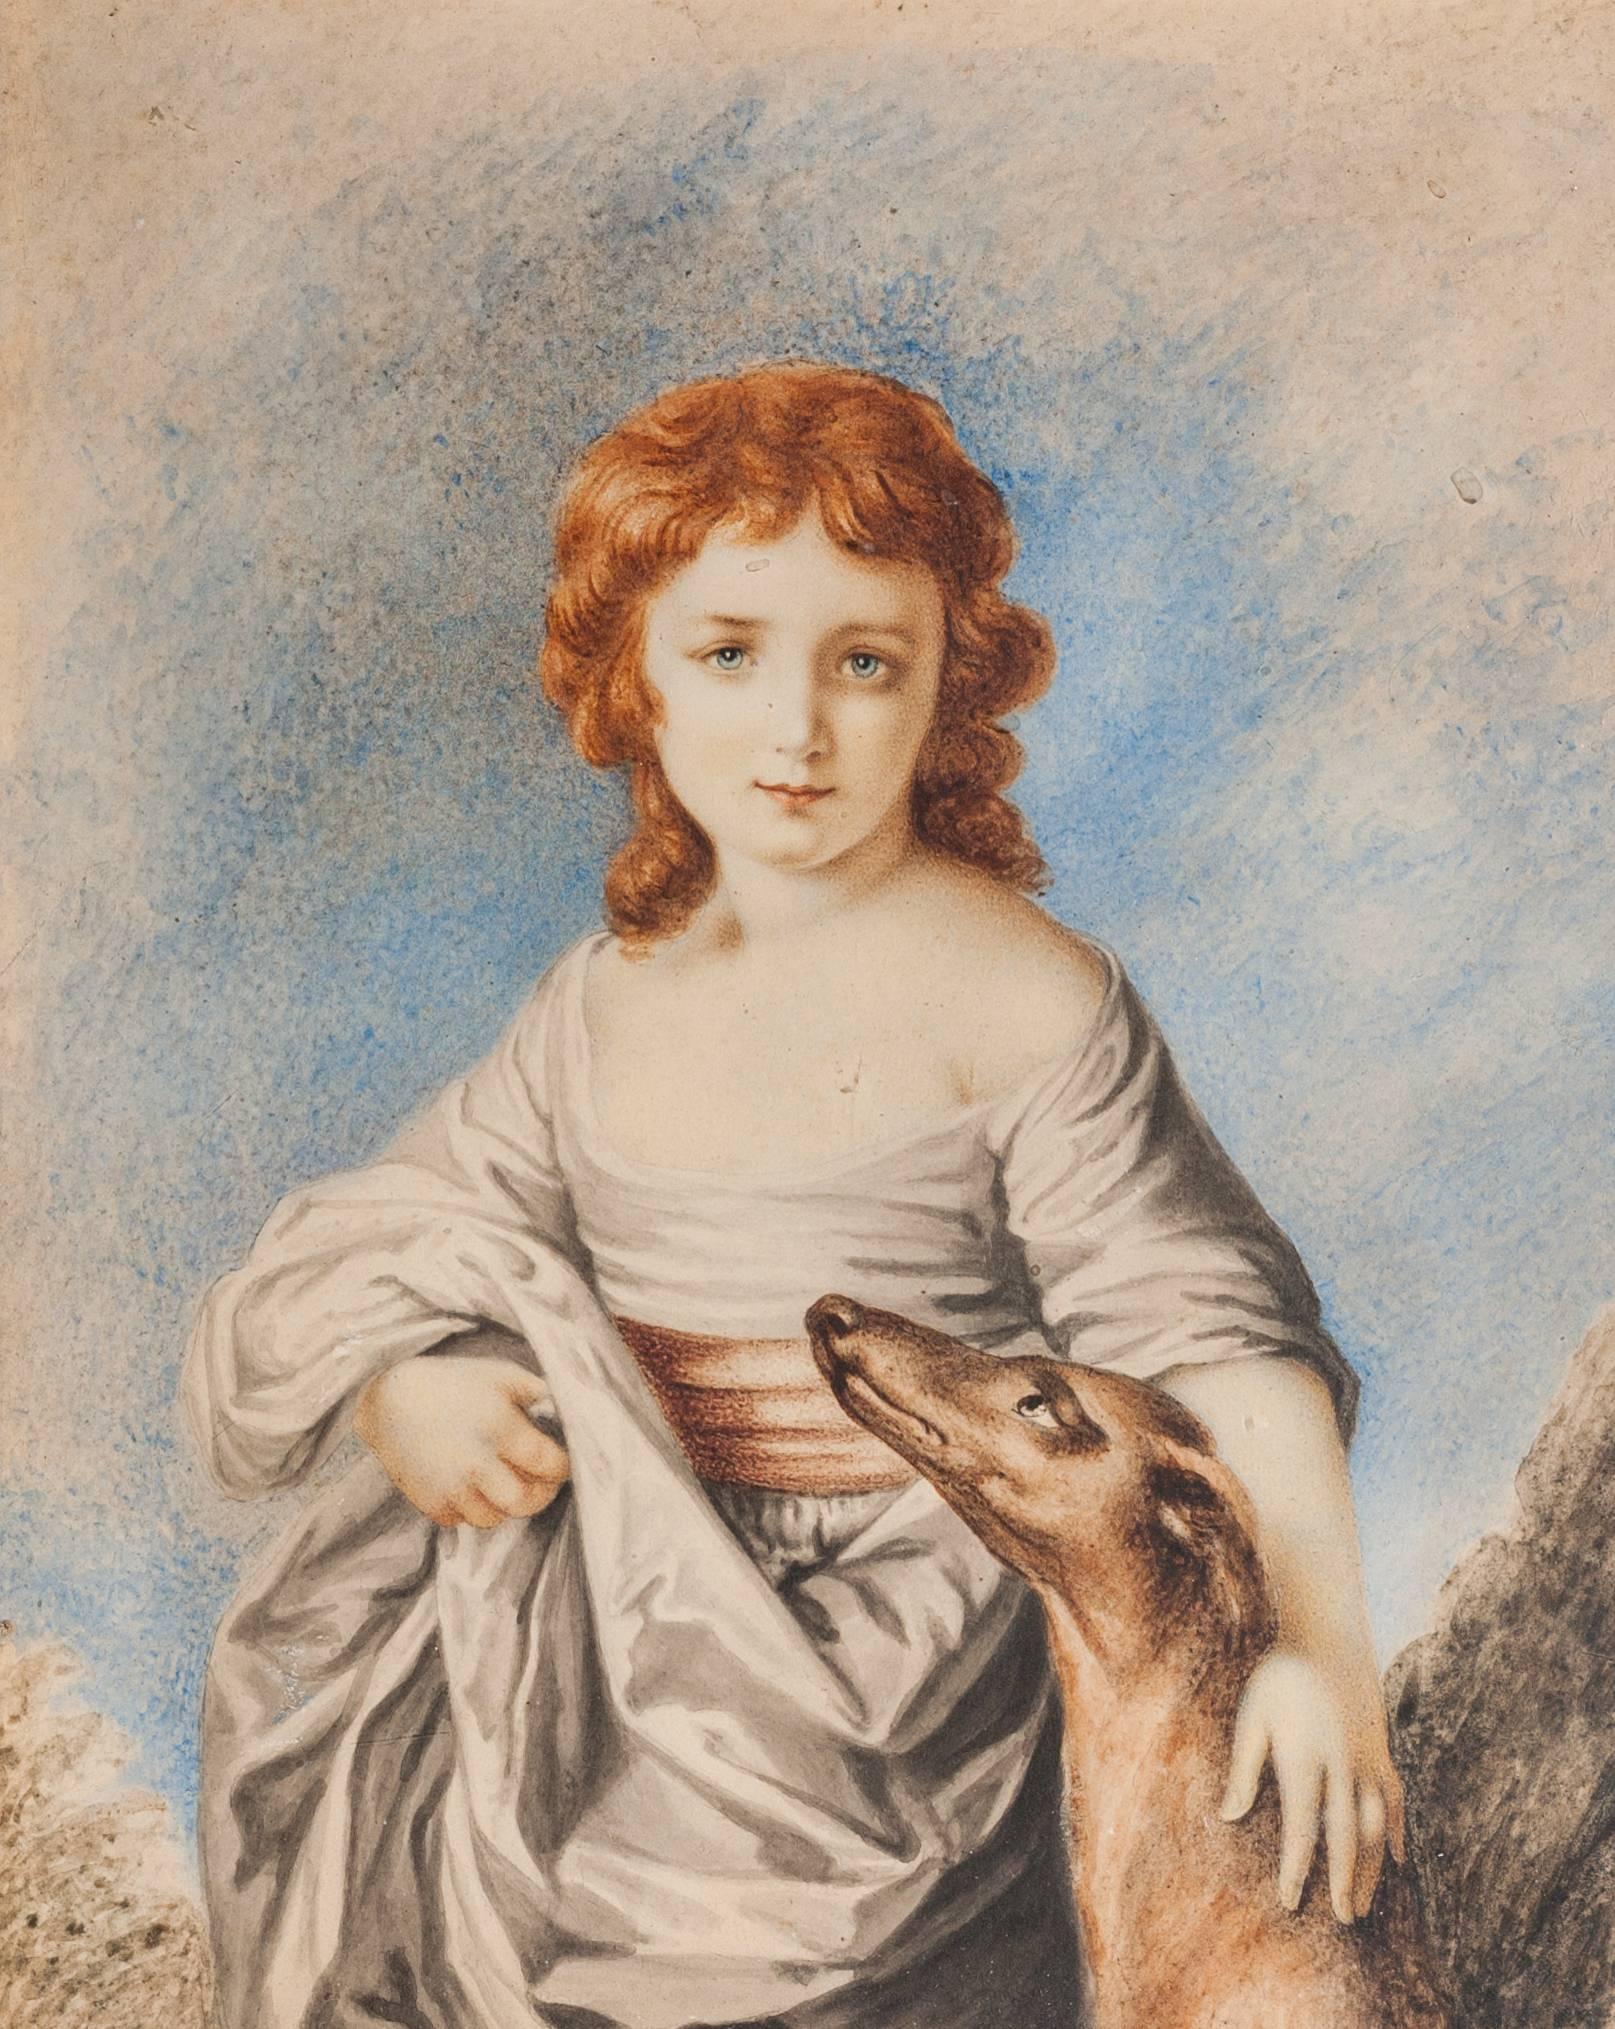 A small Regency portrait fo a young girl with hound. Finley executed in water colours and gouache, the girl is clad in early 19th century classically inspired garb with one hand resting upon her hound.

This picture is surrounded by a gilt frame